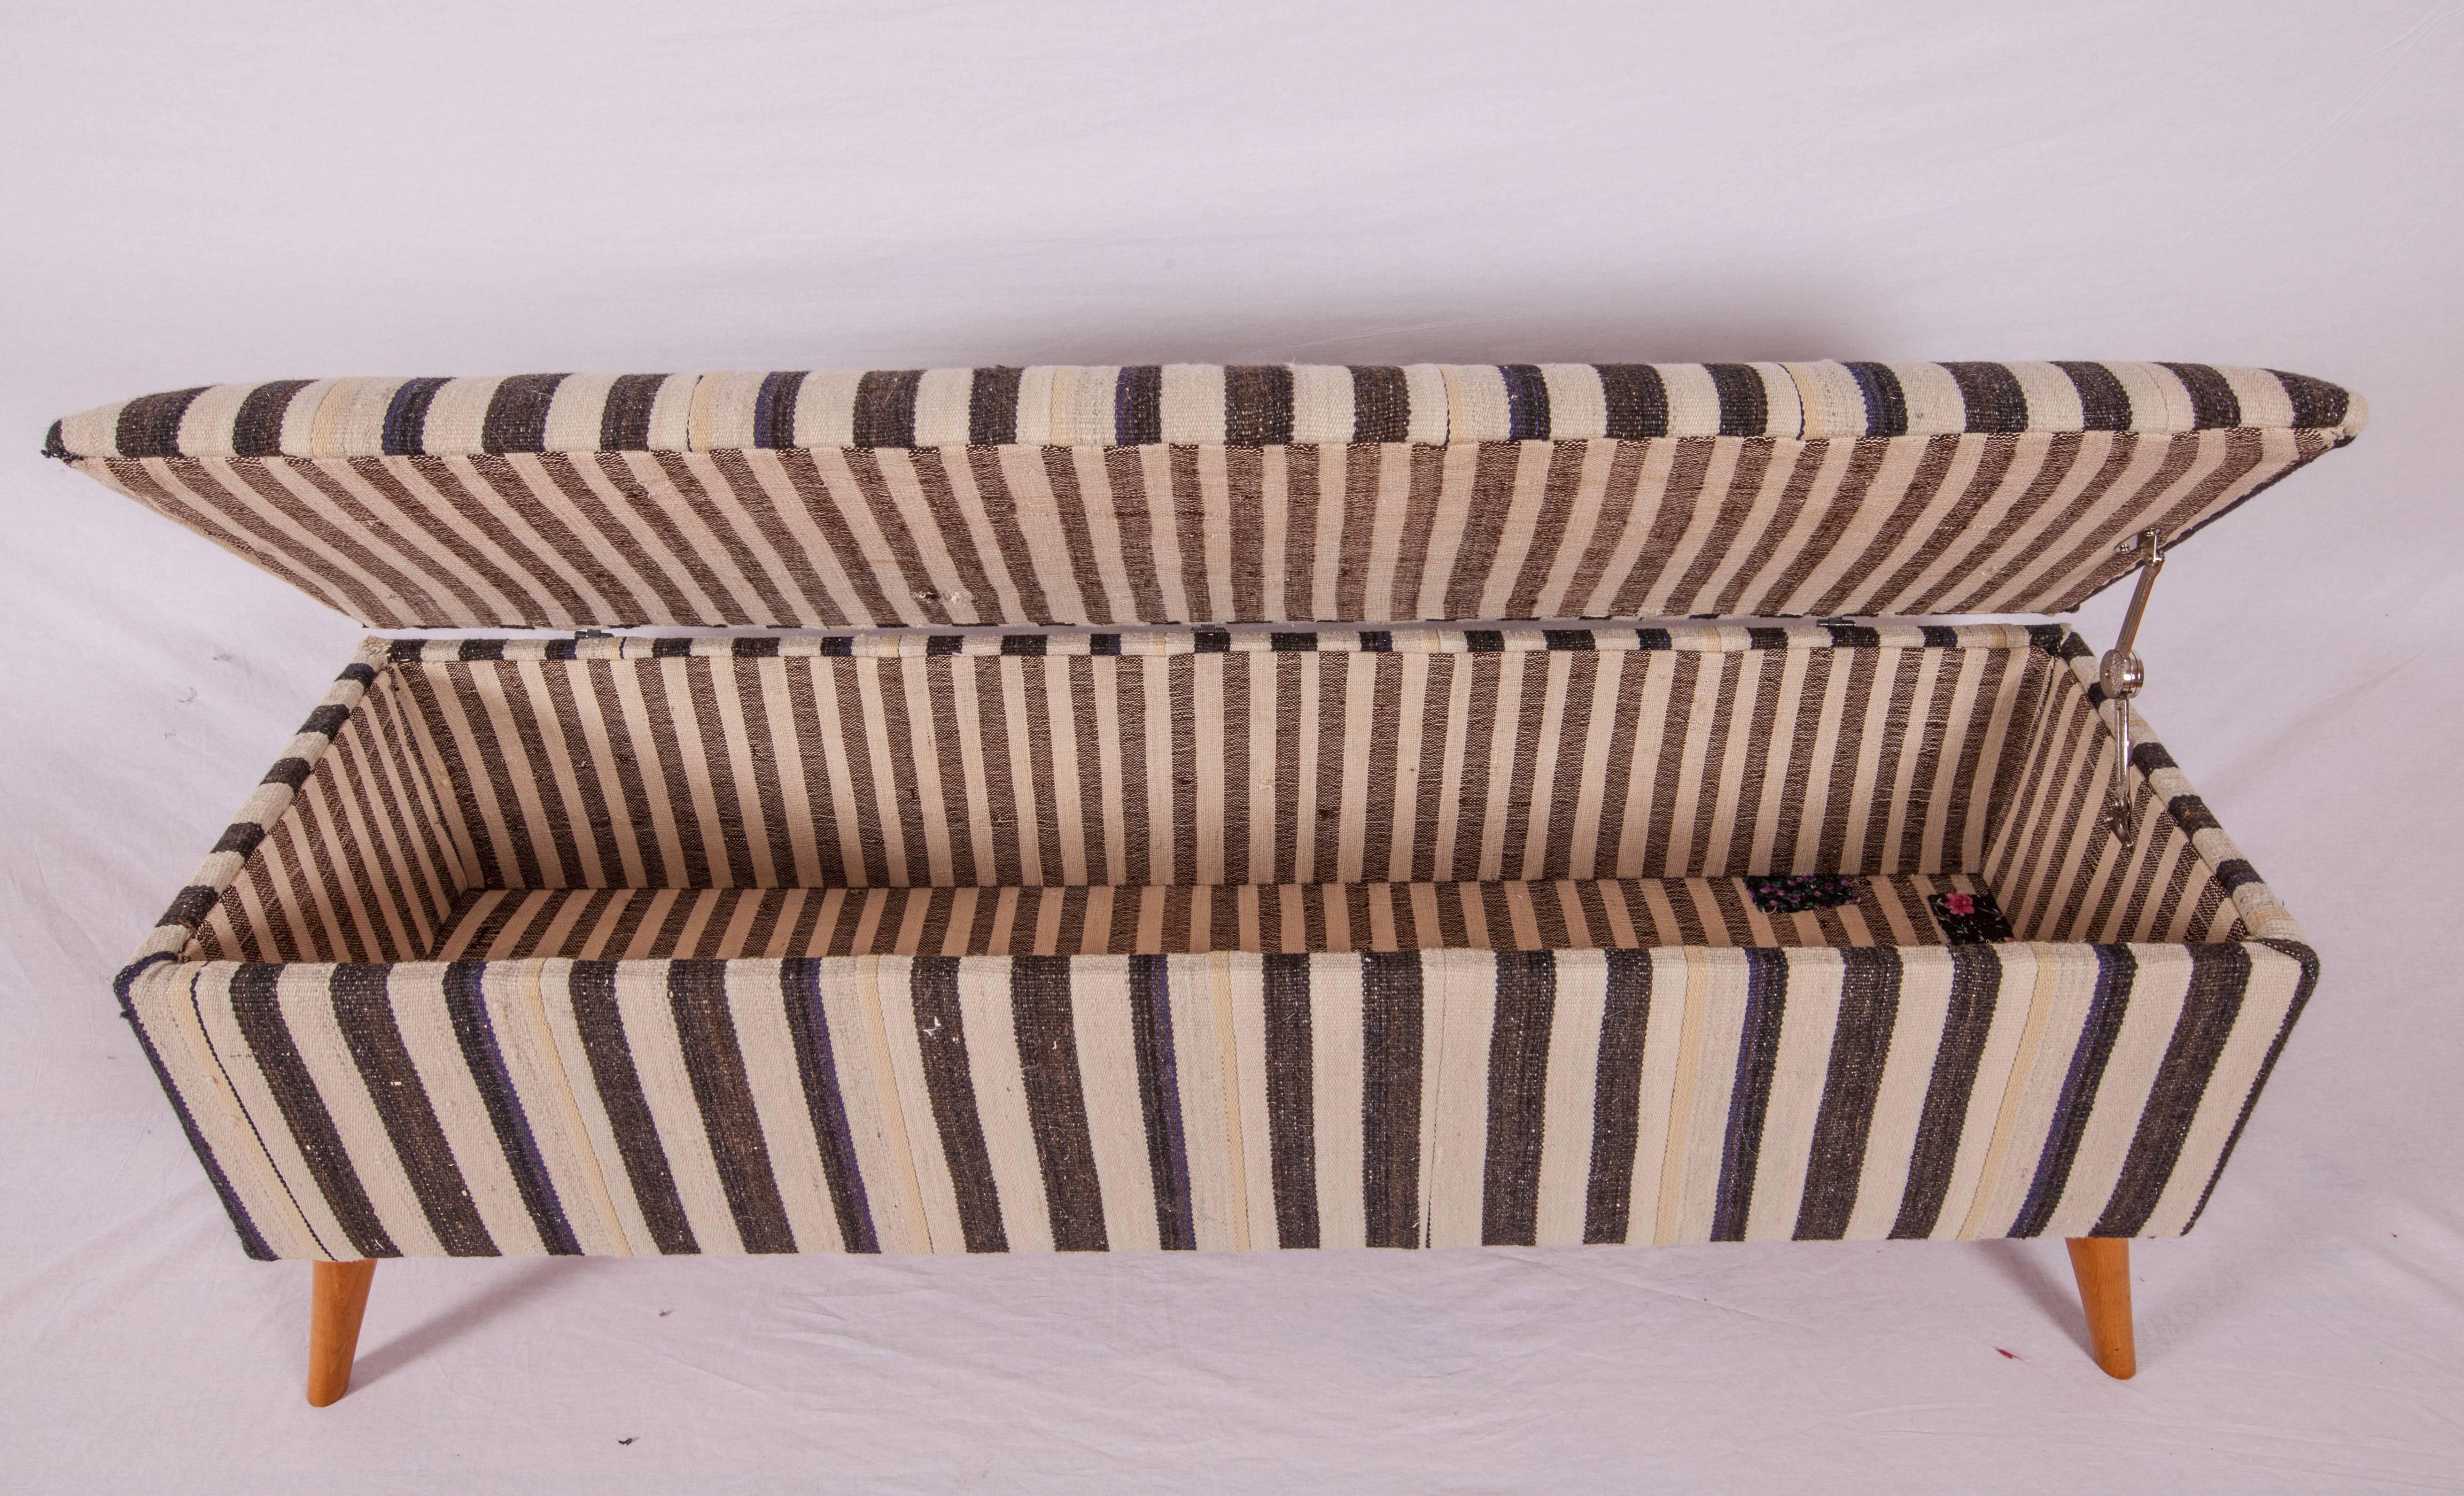 Hand-Woven Bench, Upholstered with a Vintage Anatolian Kilim